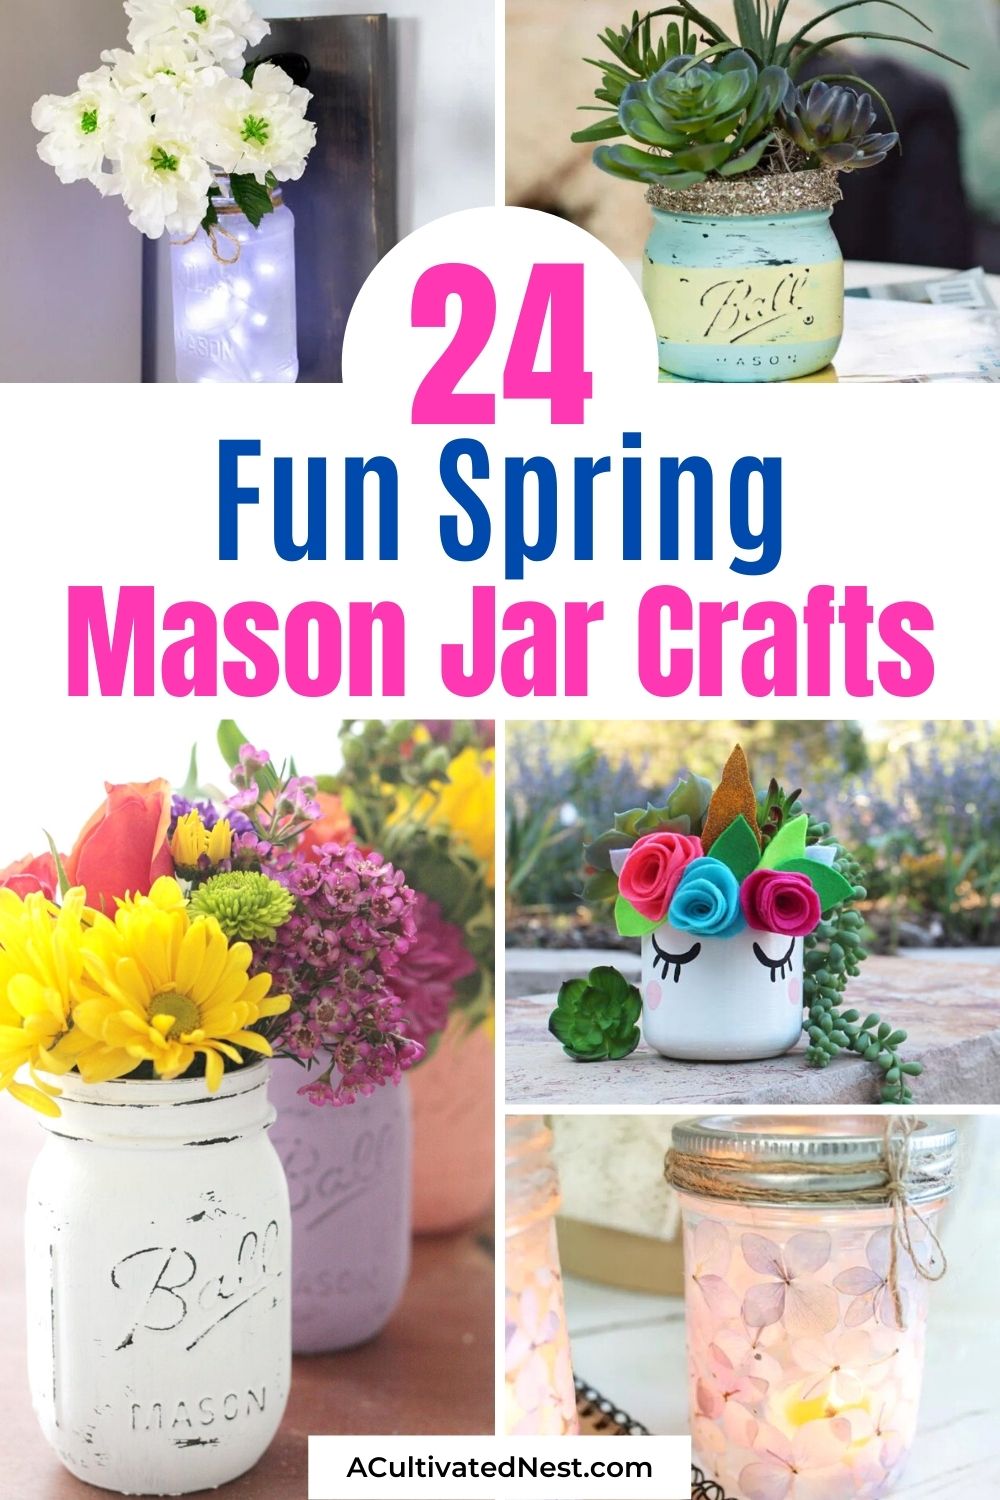 24 Fun Spring Mason Jar Crafts- Get your home ready for spring on a budget with these fun spring Mason jar crafts! There are so many easy spring Mason jar DIYs you can try! | #crafts #DIY #masonJars #springDecor #ACultivatedNest